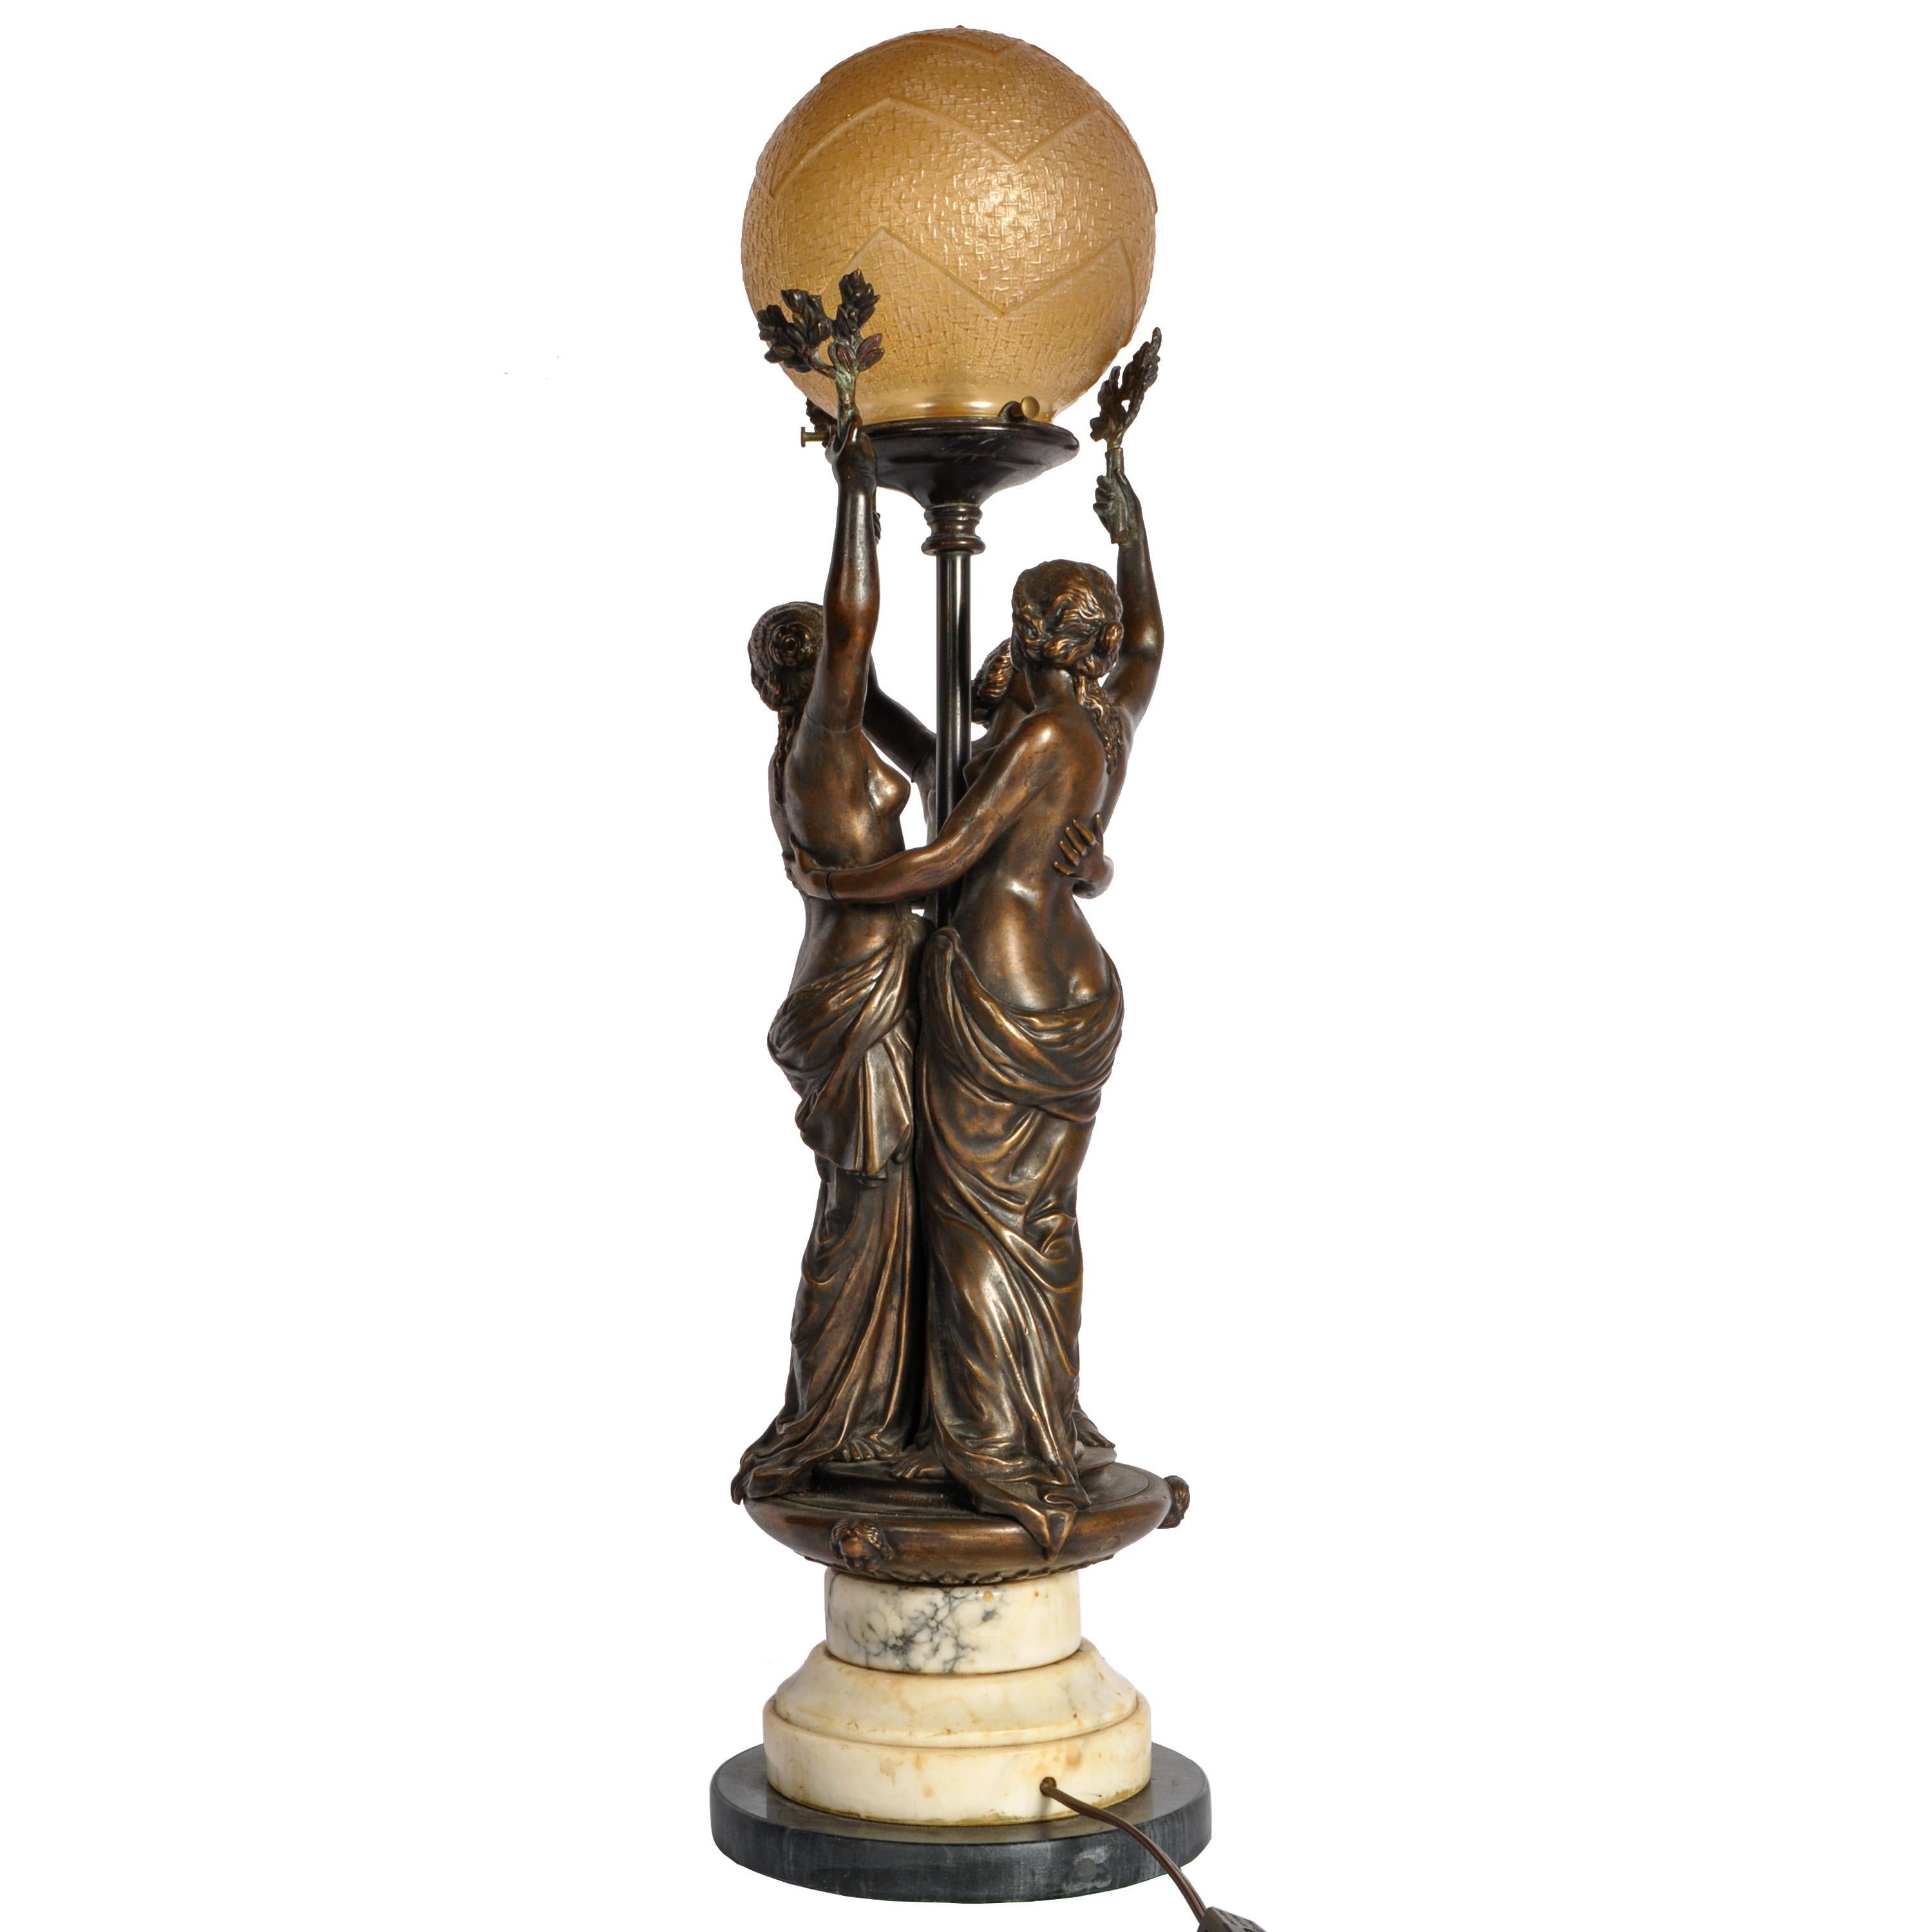 A fine & large antique French bronze statue/sculpture lamp modeled as The Three Graces, Circa 1900.
The lamp is finely modeled and cast in bronze depicting the three Graces from Greek antiquity: Euphrosyne, Aglaia and Thalia, in whom beauty was